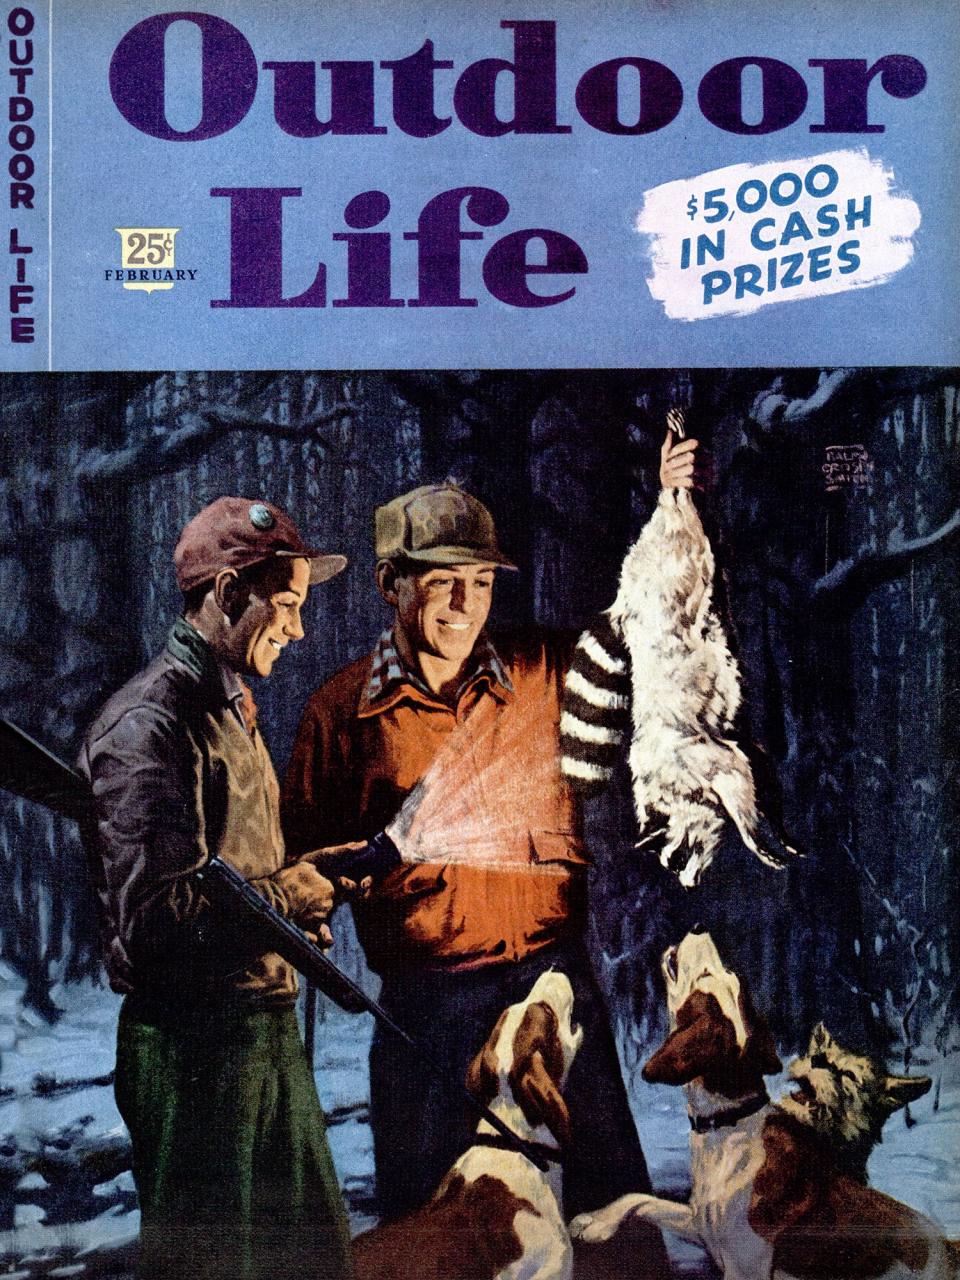 February 1946: Raccoon hunting and hound covers were common in the ’40s and ’50s.